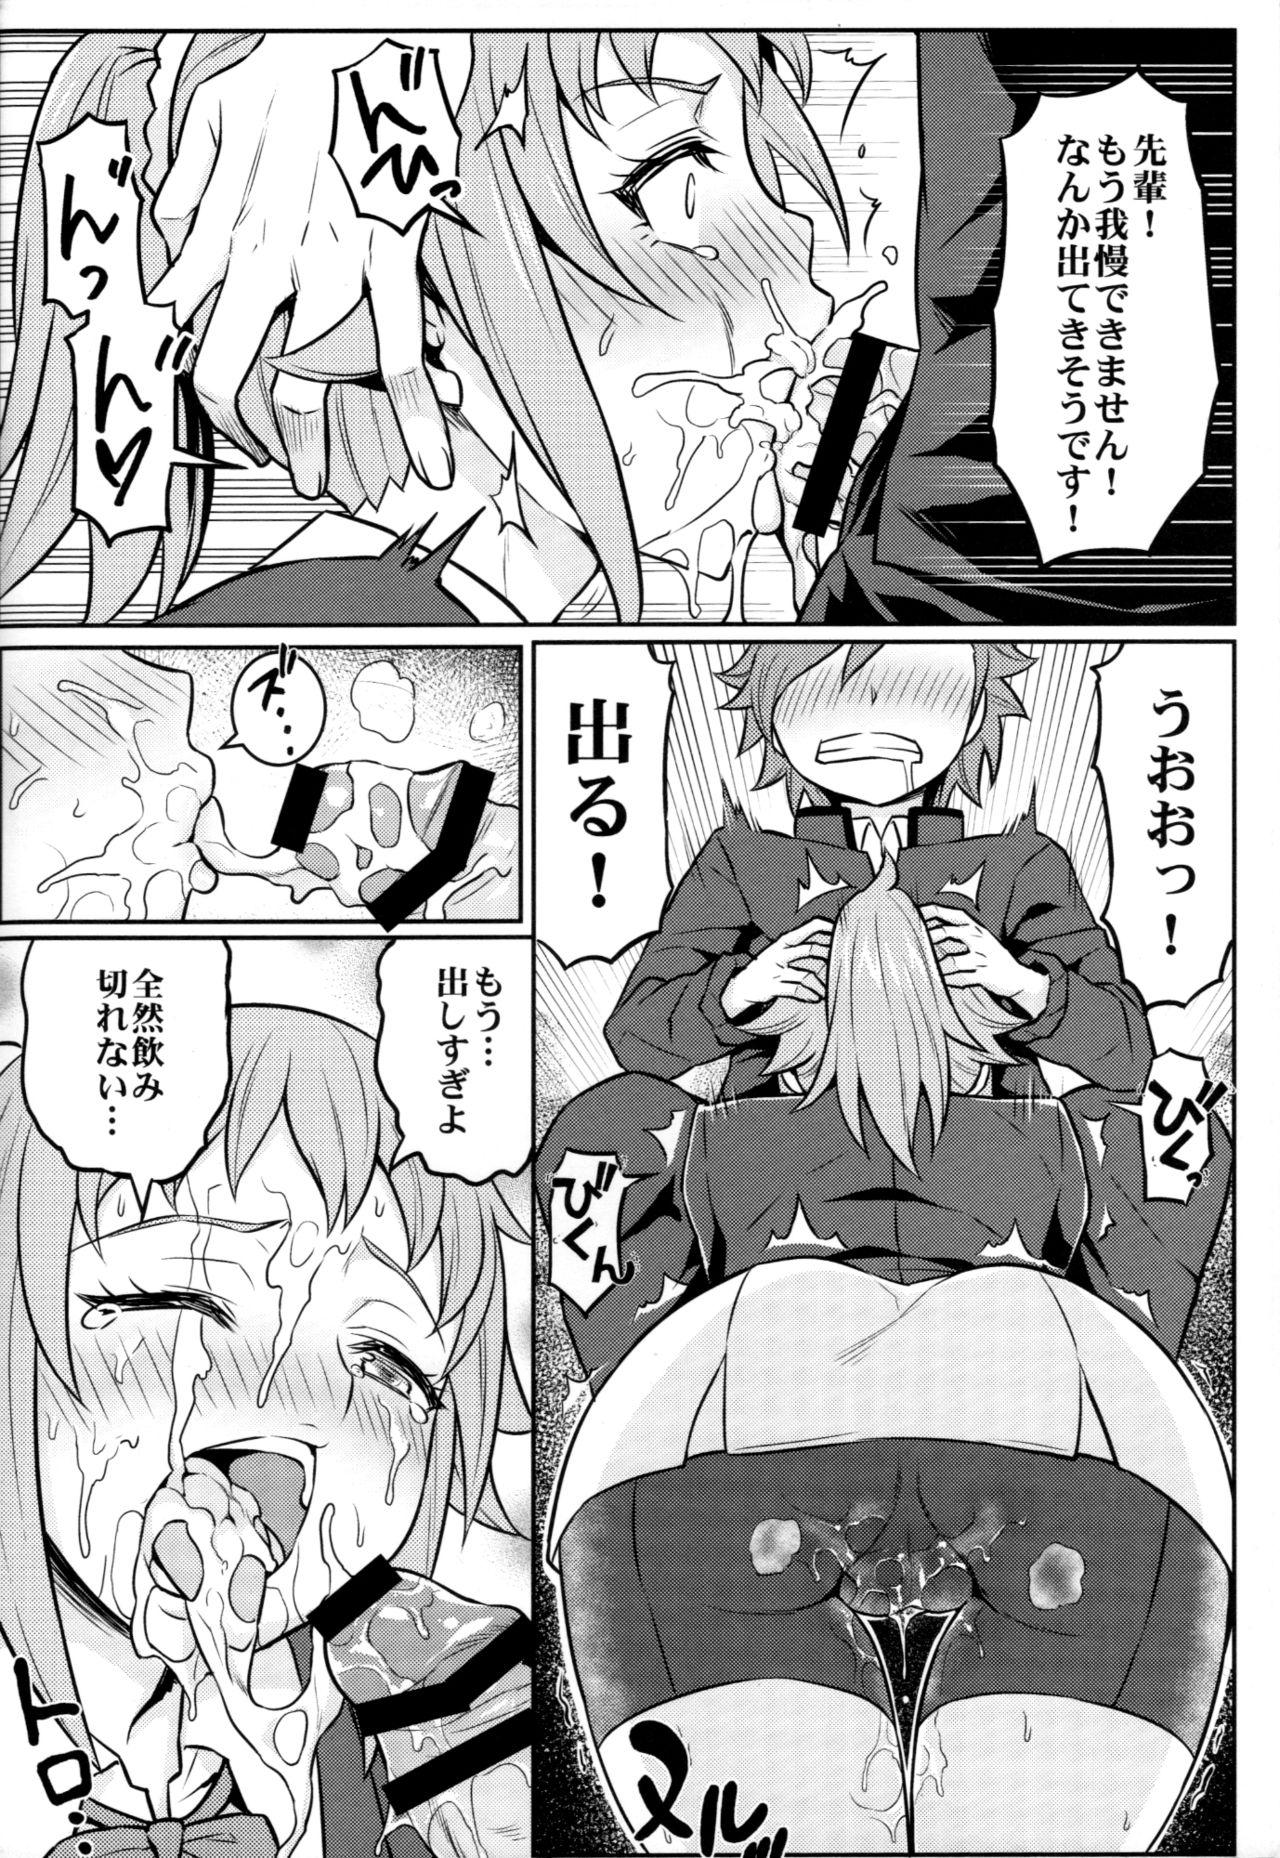 Ex Girlfriends Nayamashii Fighters - Gundam build fighters try Dildos - Page 9